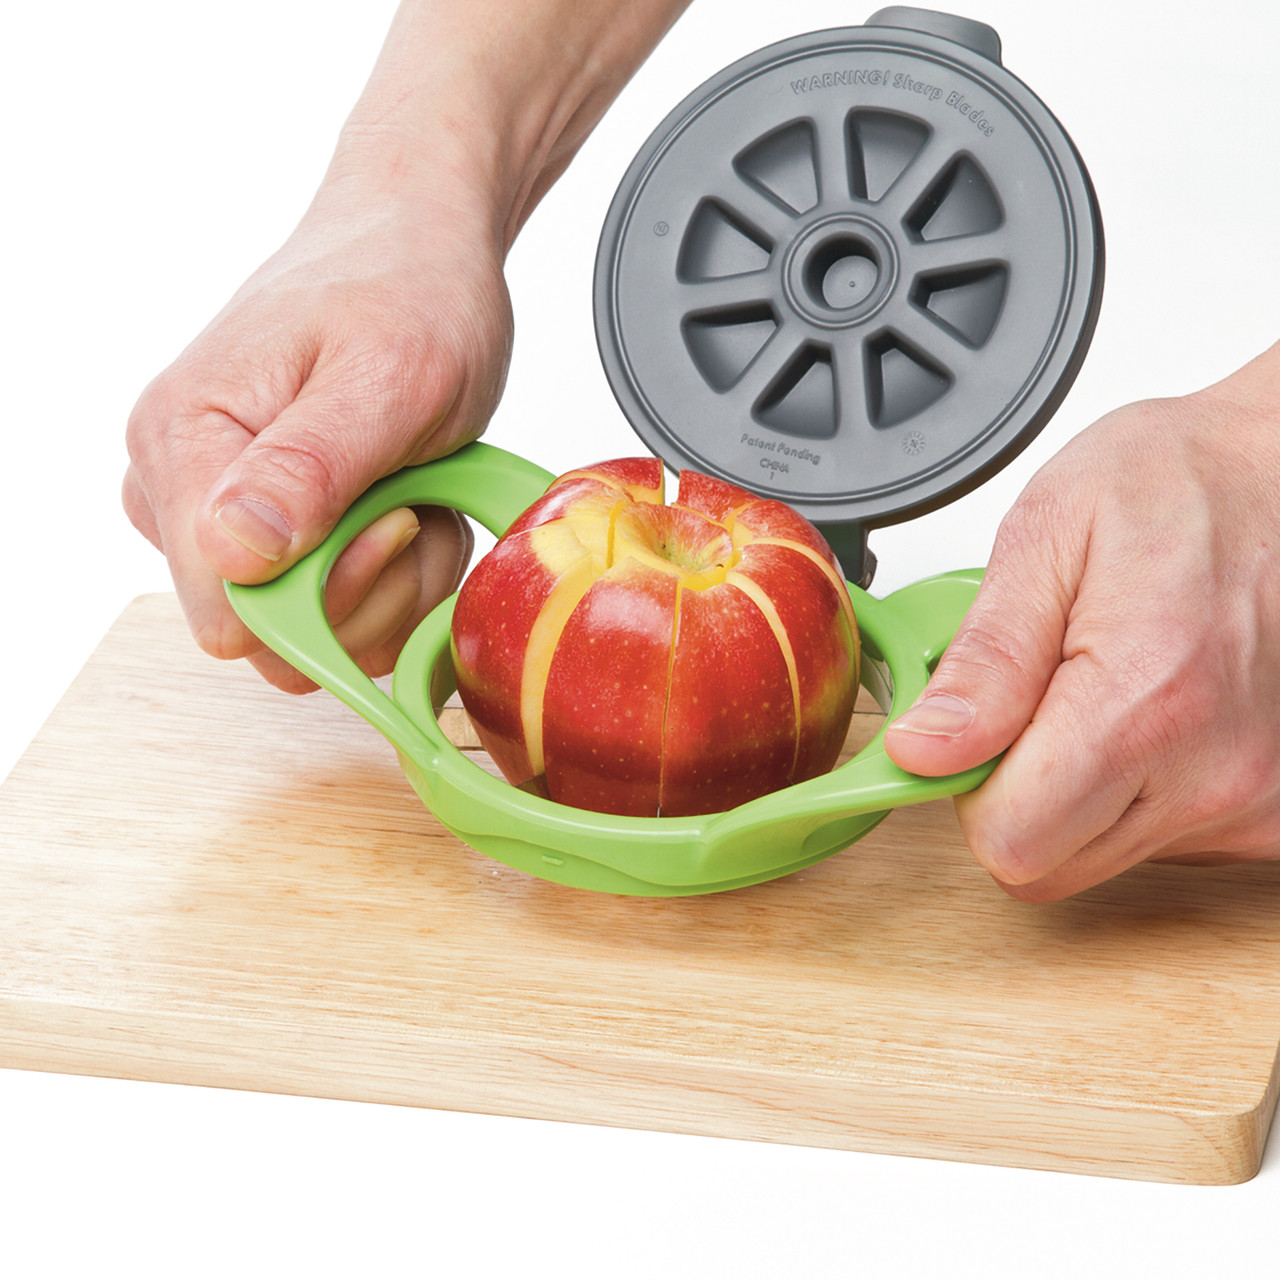 Apple Slicer Can Make 8 Pieces or 16 - The New York Times